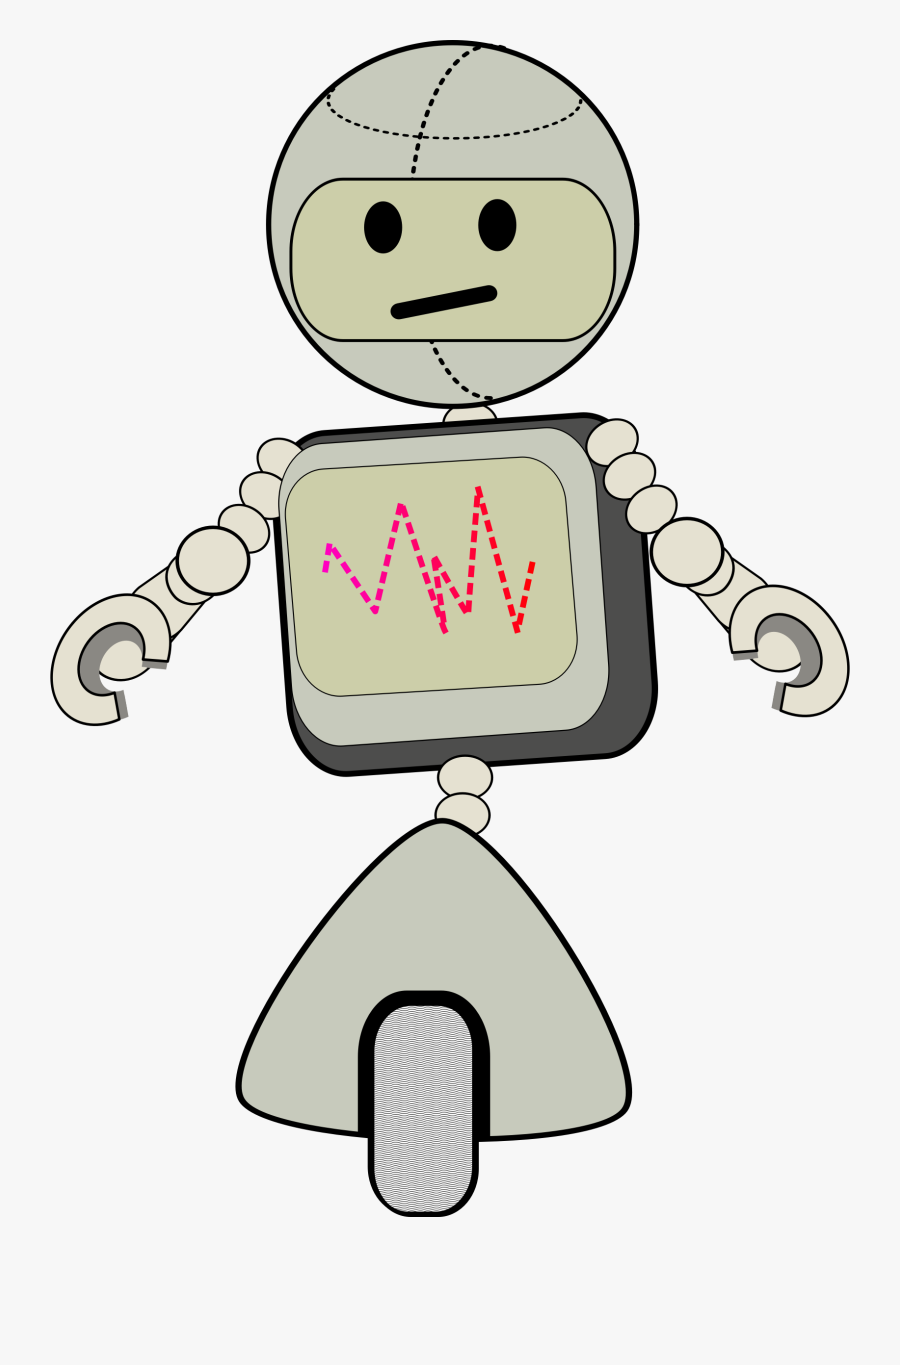 Tall Robot - Robot On One Wheel Drawing, Transparent Clipart